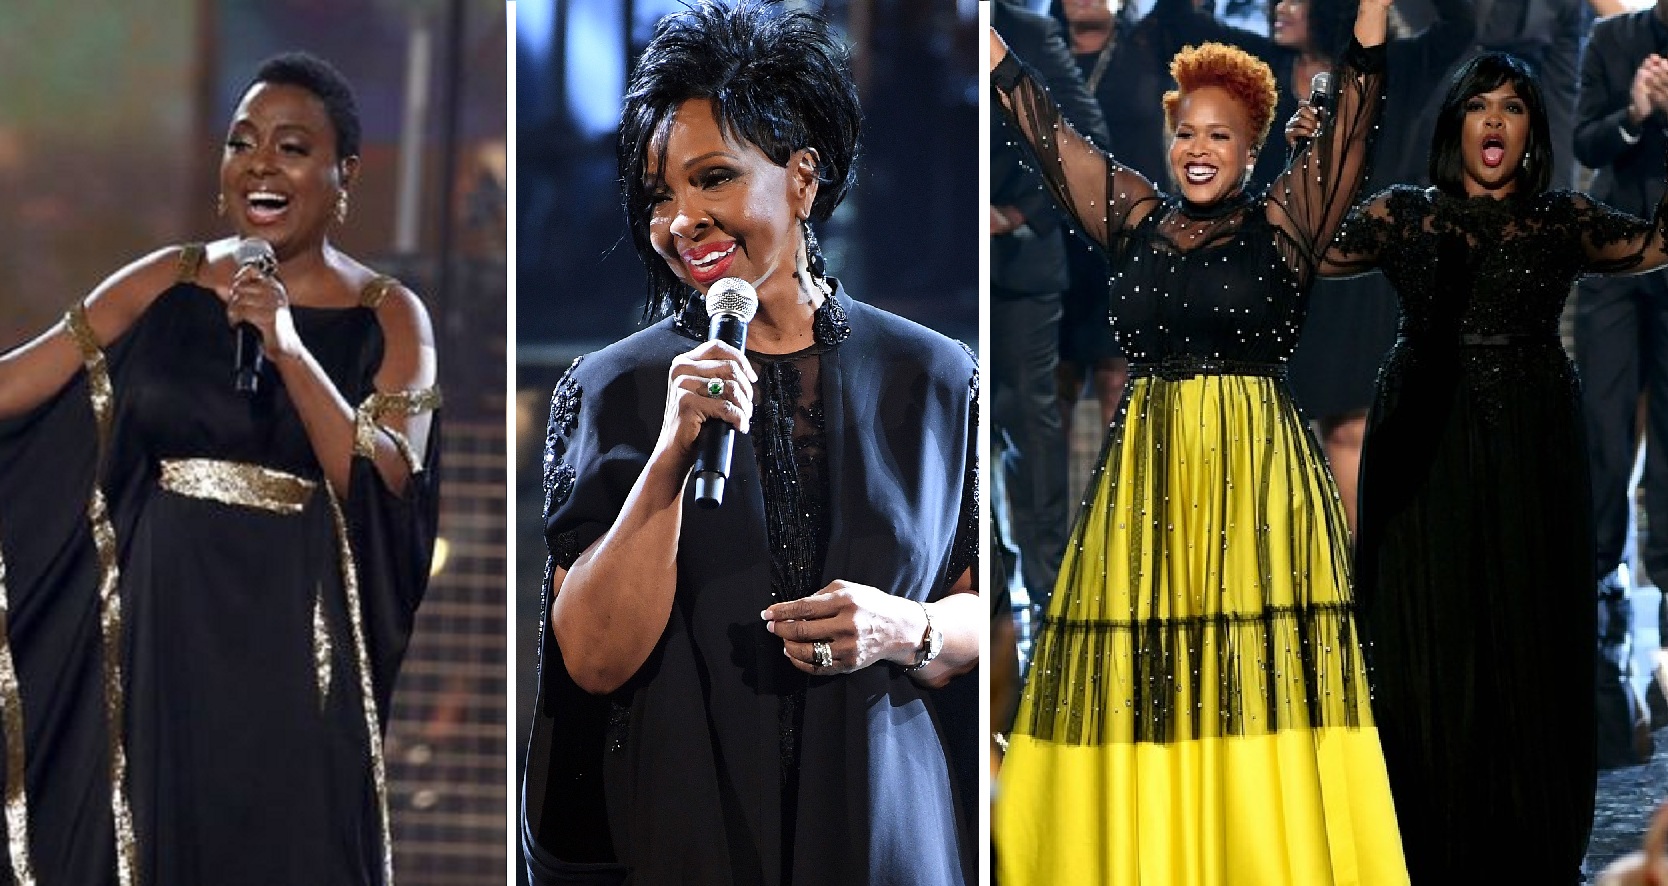 Aretha Franklin Receives Stellar Tribute At AMAs, Feat. Gladys Knight, Ledisi, CeCe Winans and More!